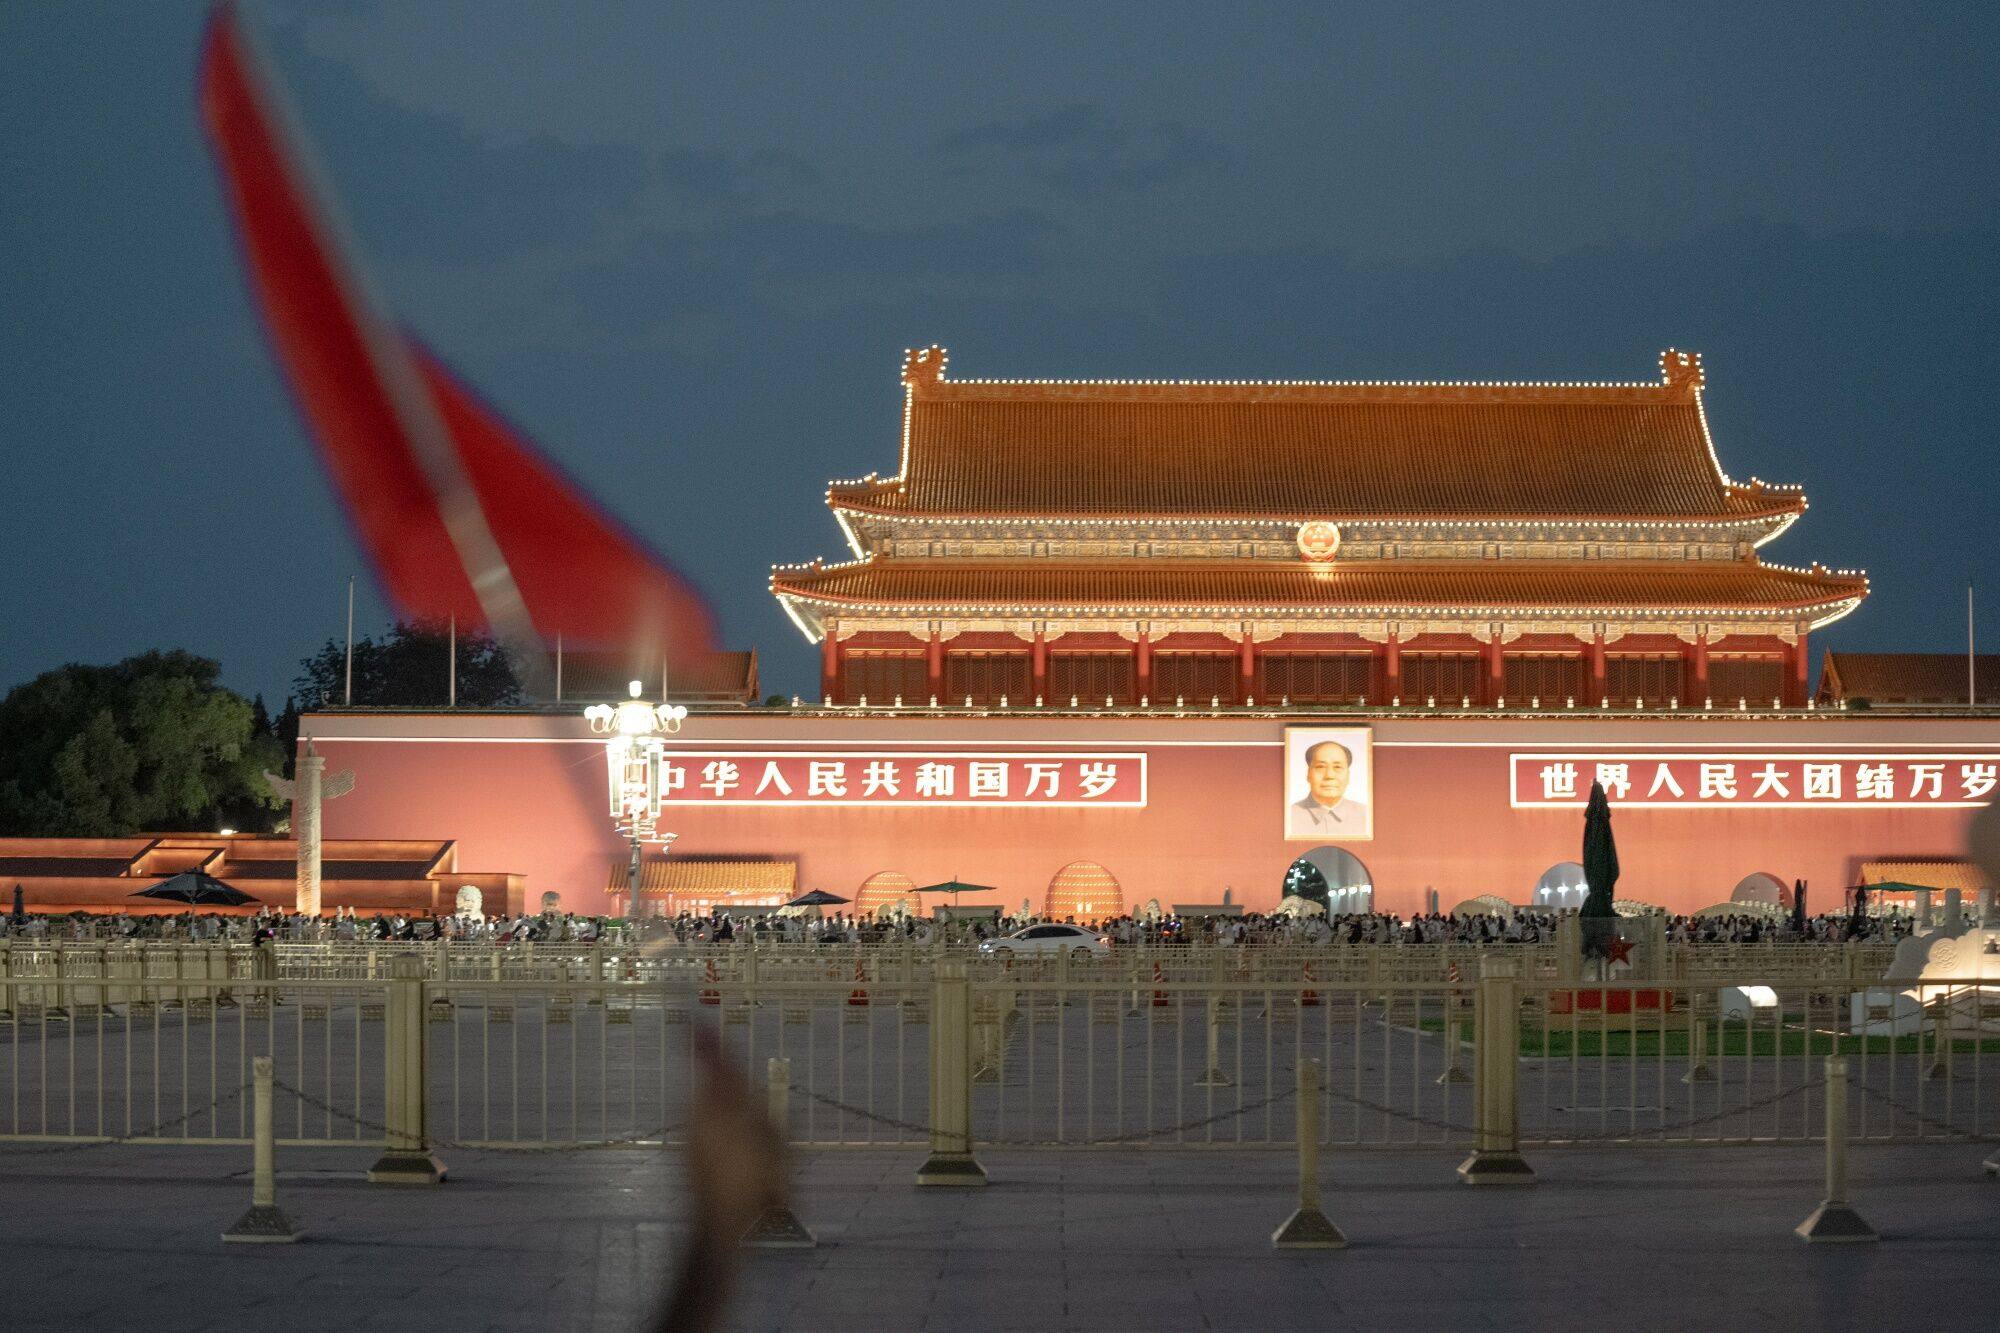 The Communist Party’s elite Central Committee is currently in the middle of the third plenum, a key policy meeting that will determine the country’s development plan for the next five to 10 years. Photo: Bloomberg